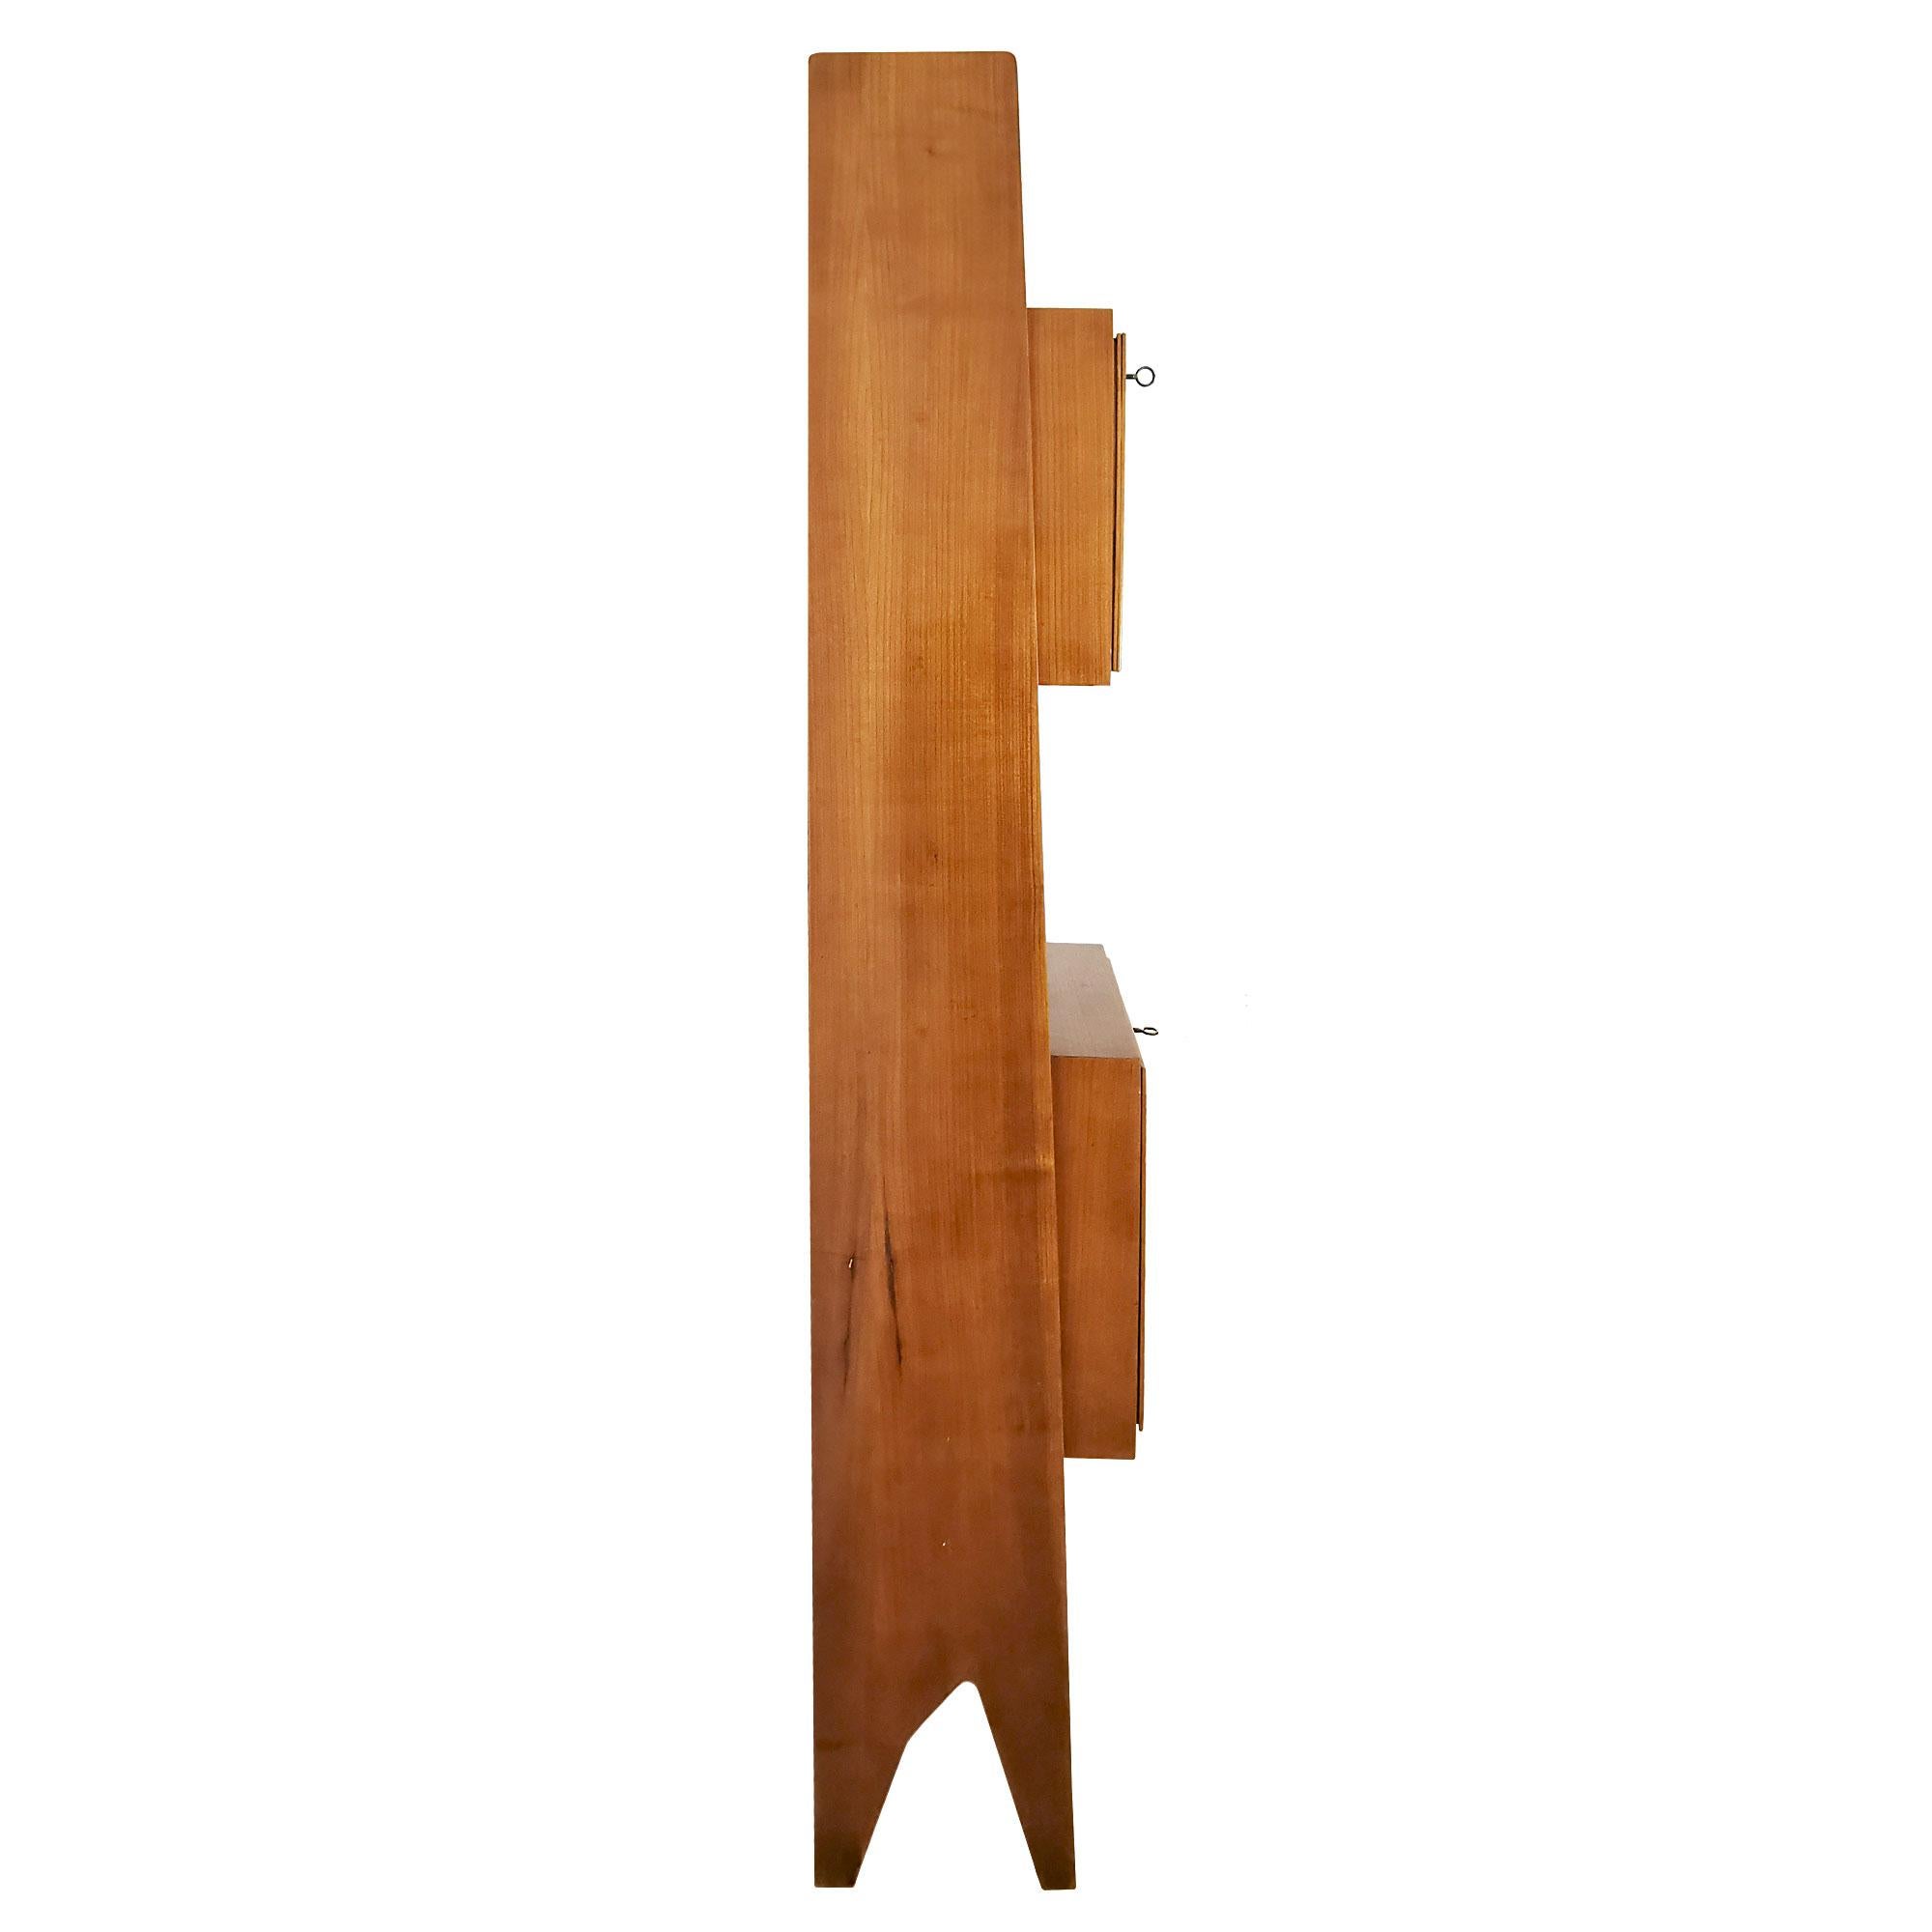 Italian Mid-Century Modern Cherry Wood Bookcase With Shelves and Two Doors - Italy For Sale